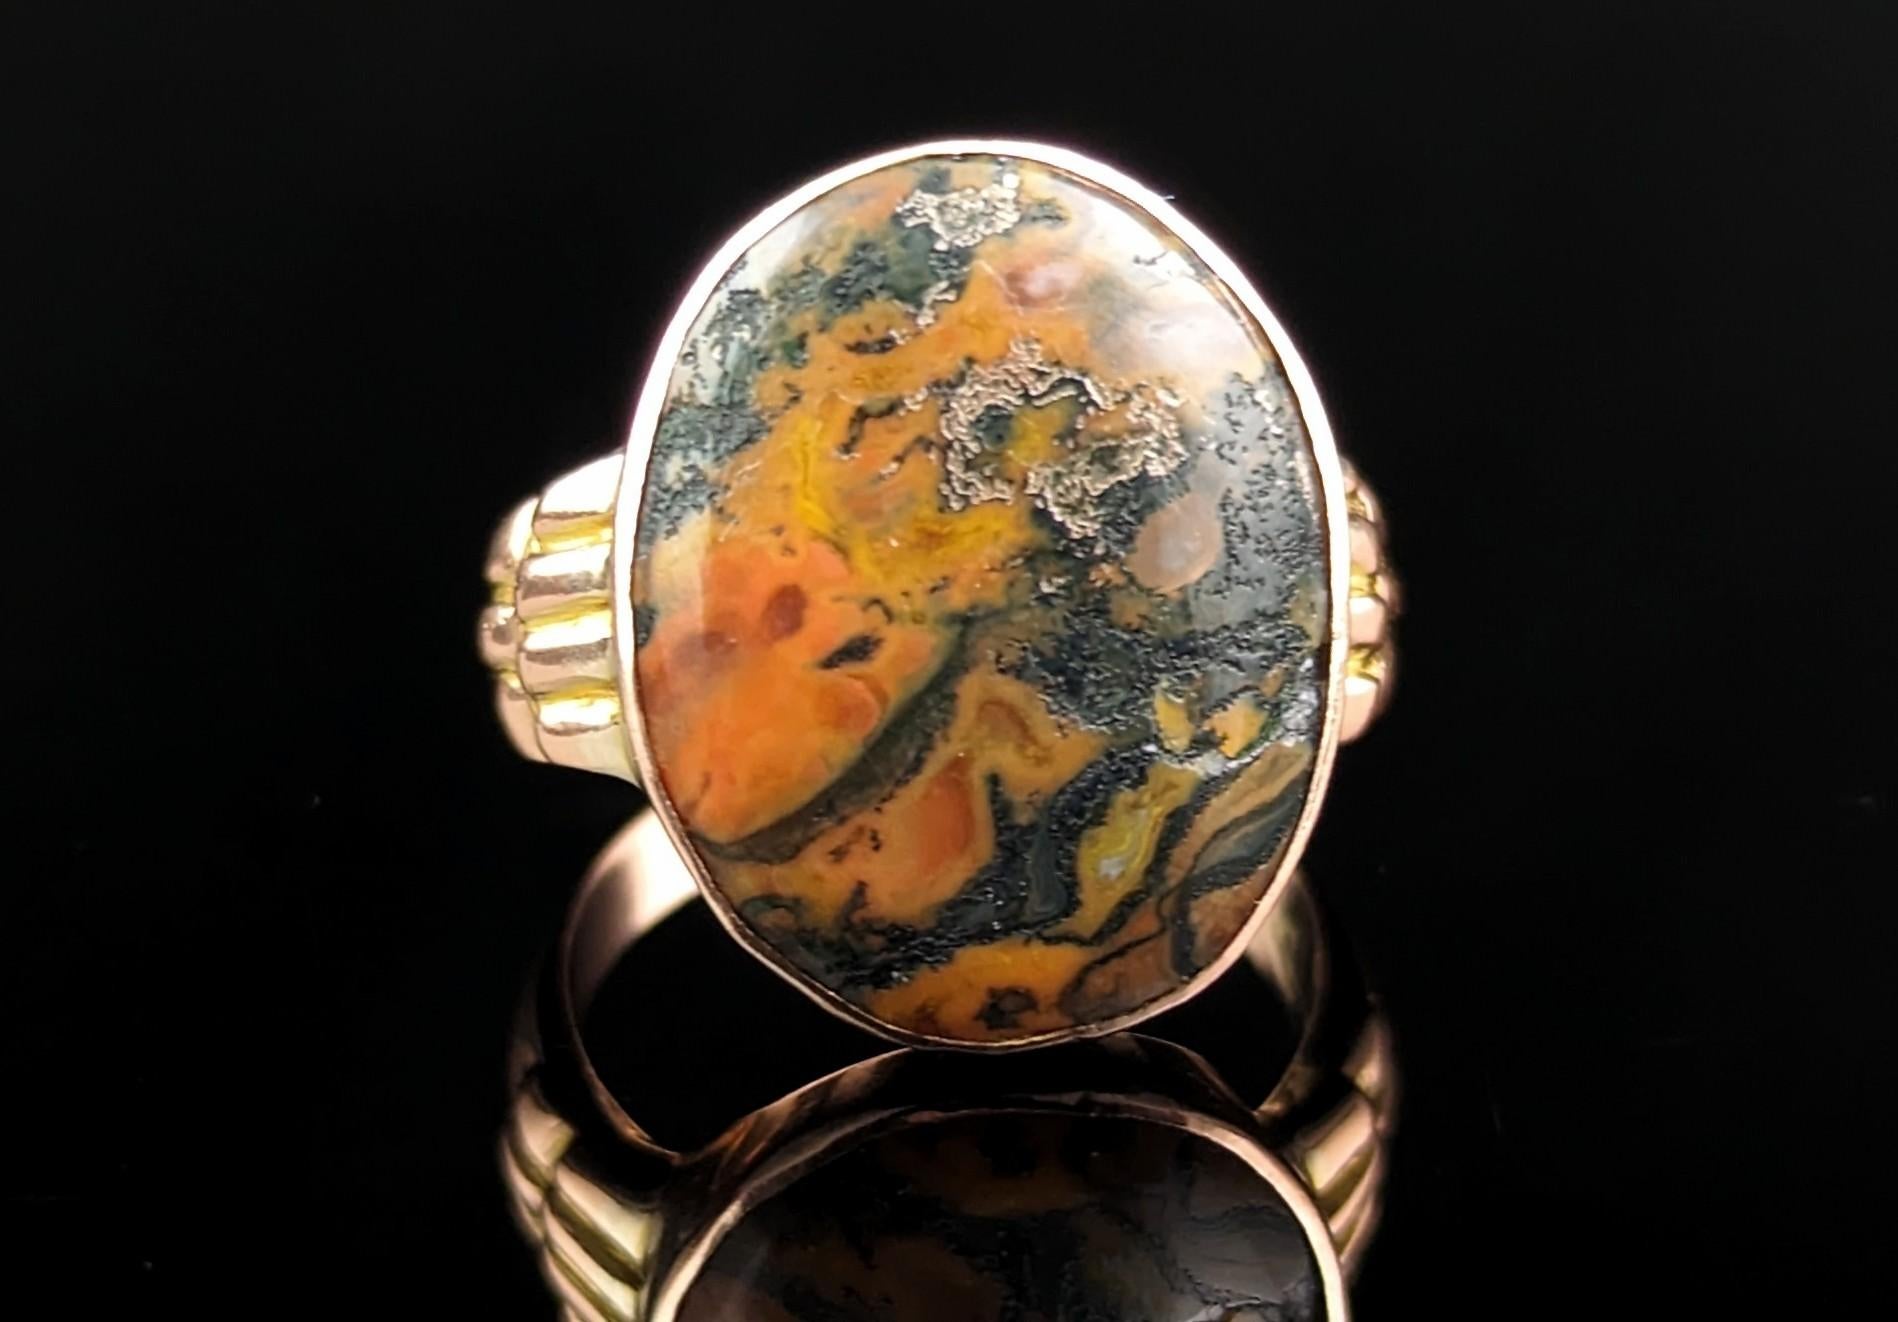 This stylish antique 9ct gold and Moss agate signet ring is the perfect pinky ring choice!

It has an oval shaped face set with a rich and vibrant moss agate stone, the agate has lovely tones ranging from orange to dark green.

It has chunky stepped